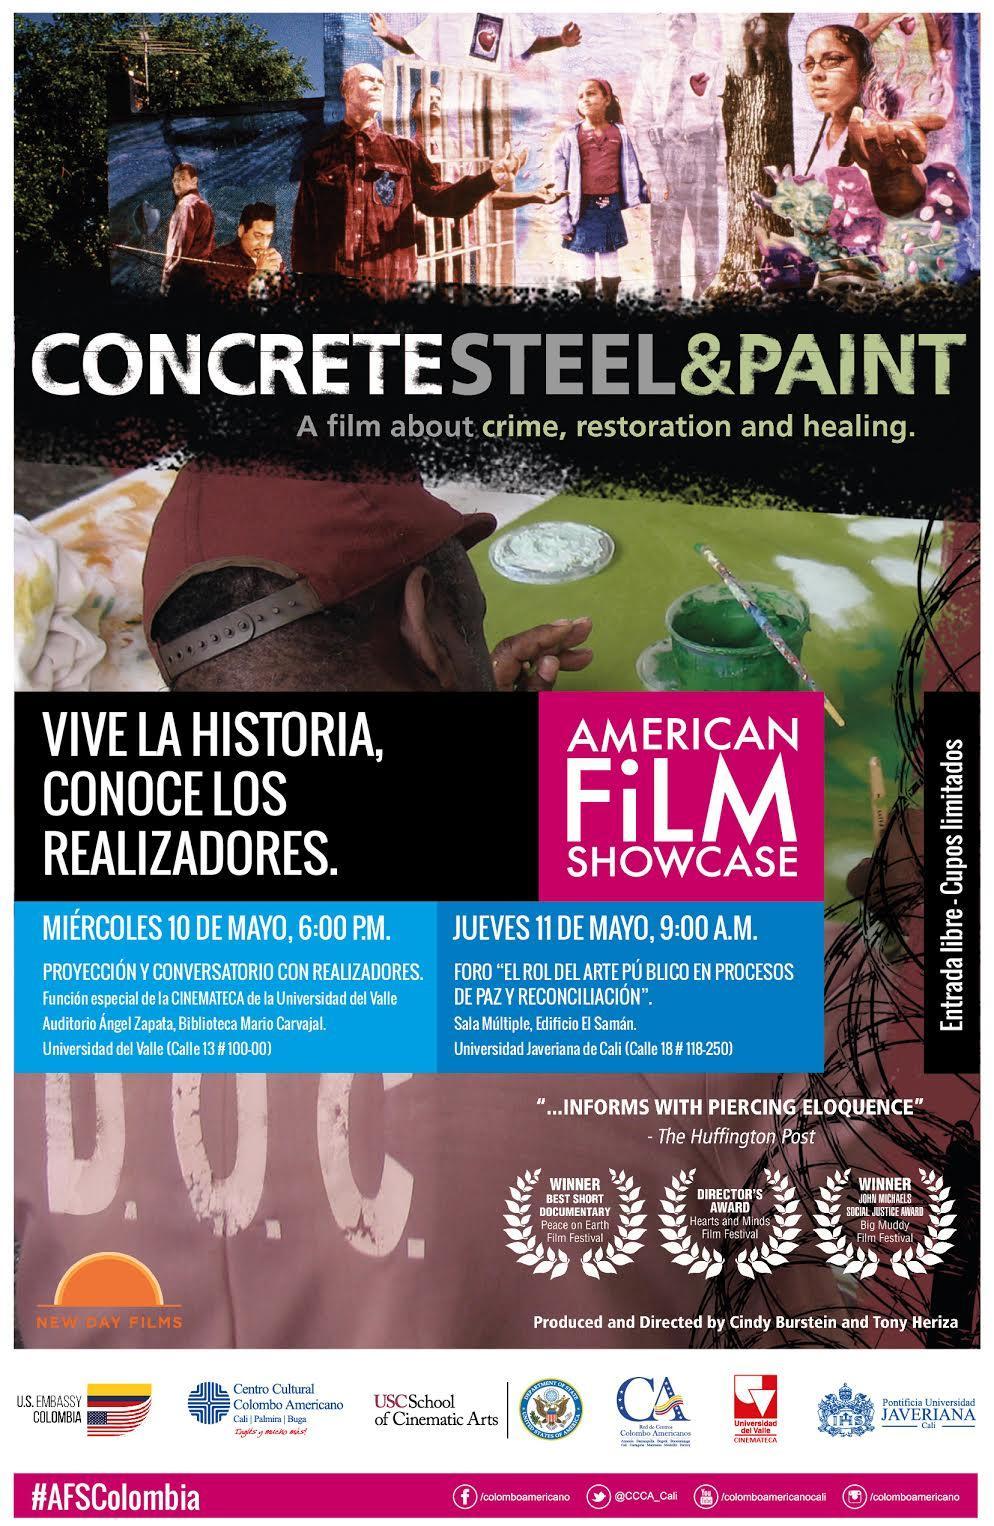 Concrete steel and paint movie poster